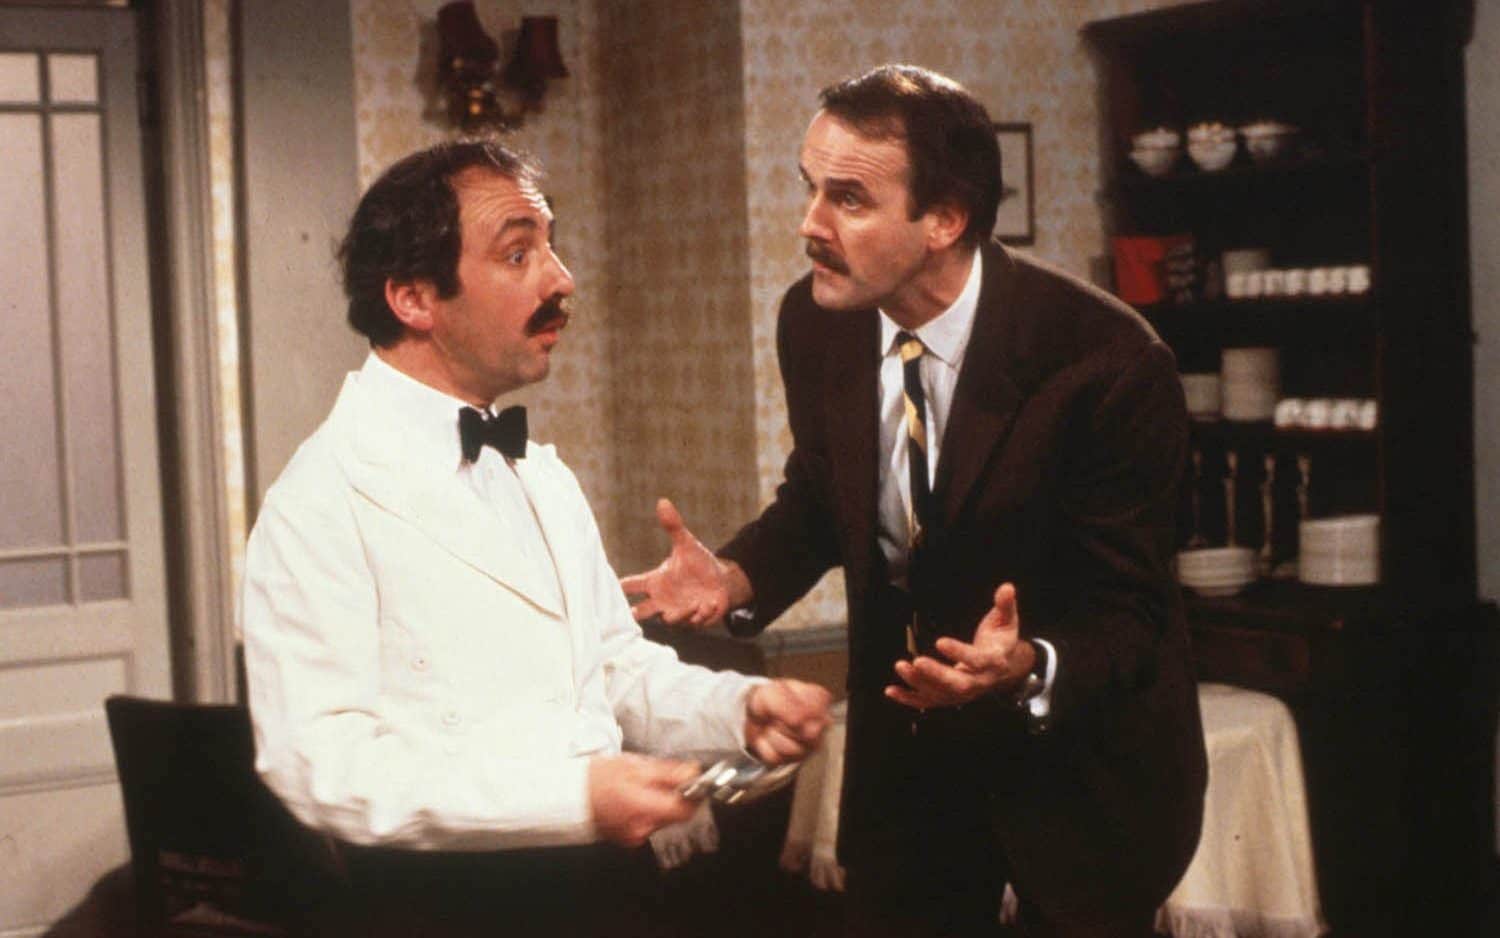 Schools should use Fawlty Towers as an offence-inducing teaching resource for fragile Gen Zers